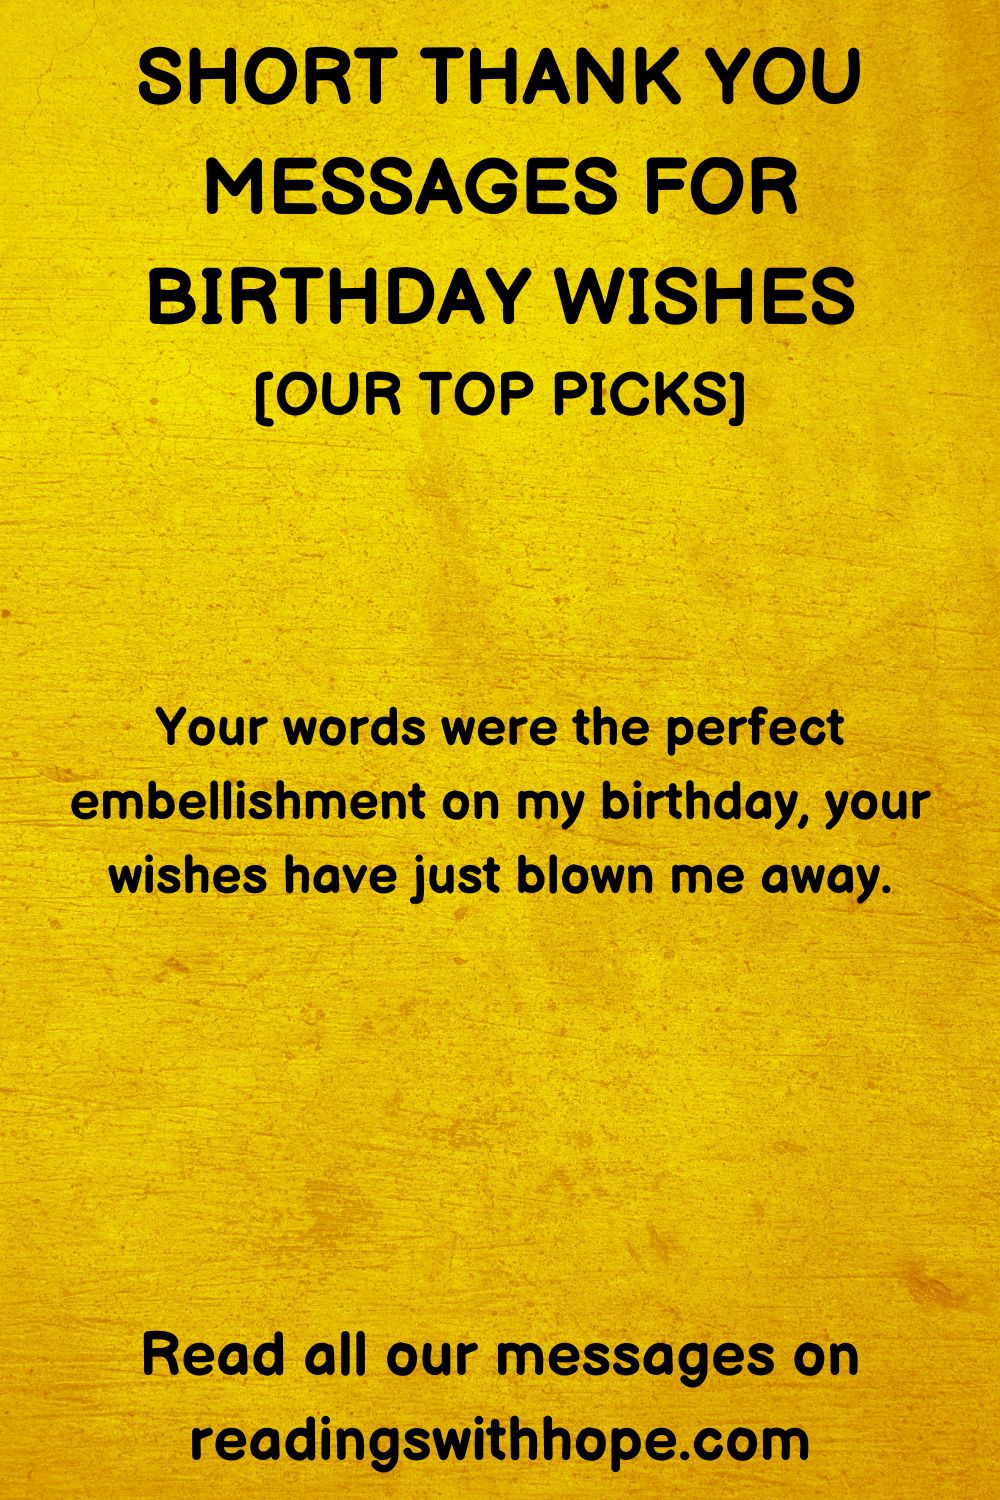 short thank you message for birthday wish